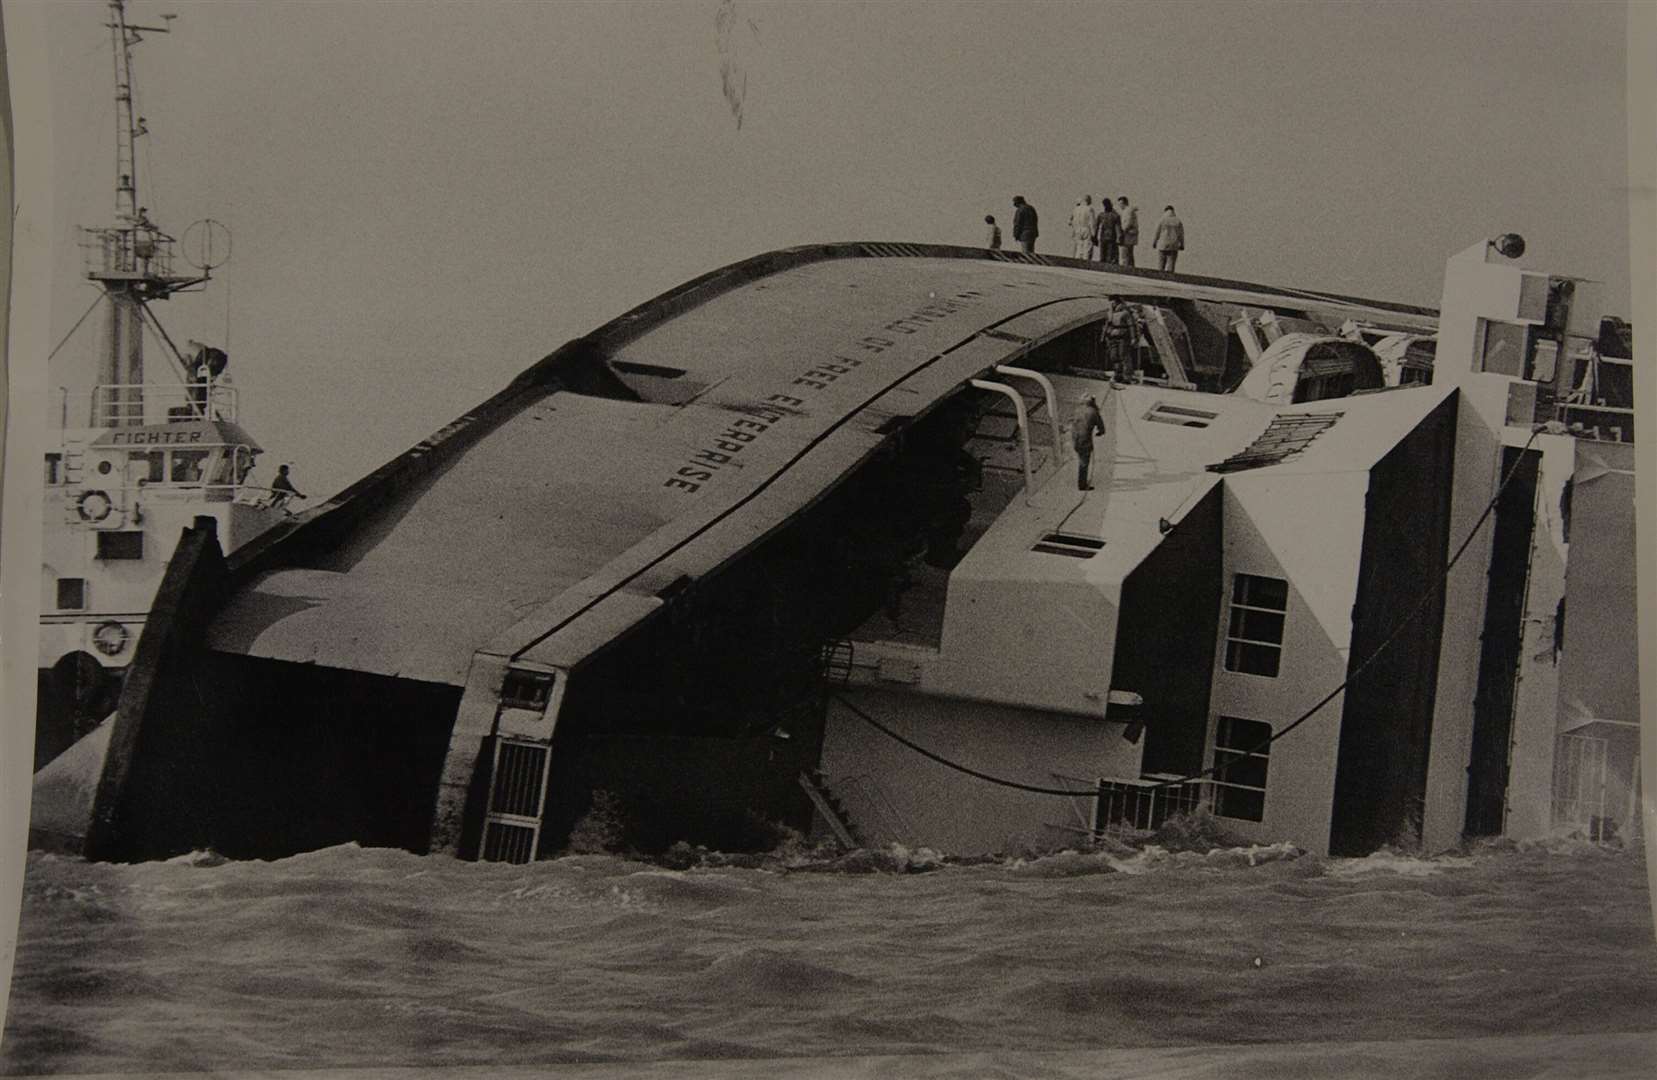 The Herald of Free Enterprise disaster saw 193 passengers and crew perish in the tragedy on March 6, 1987. It was described as the biggest maritime disaster since the sinking of the Titanic